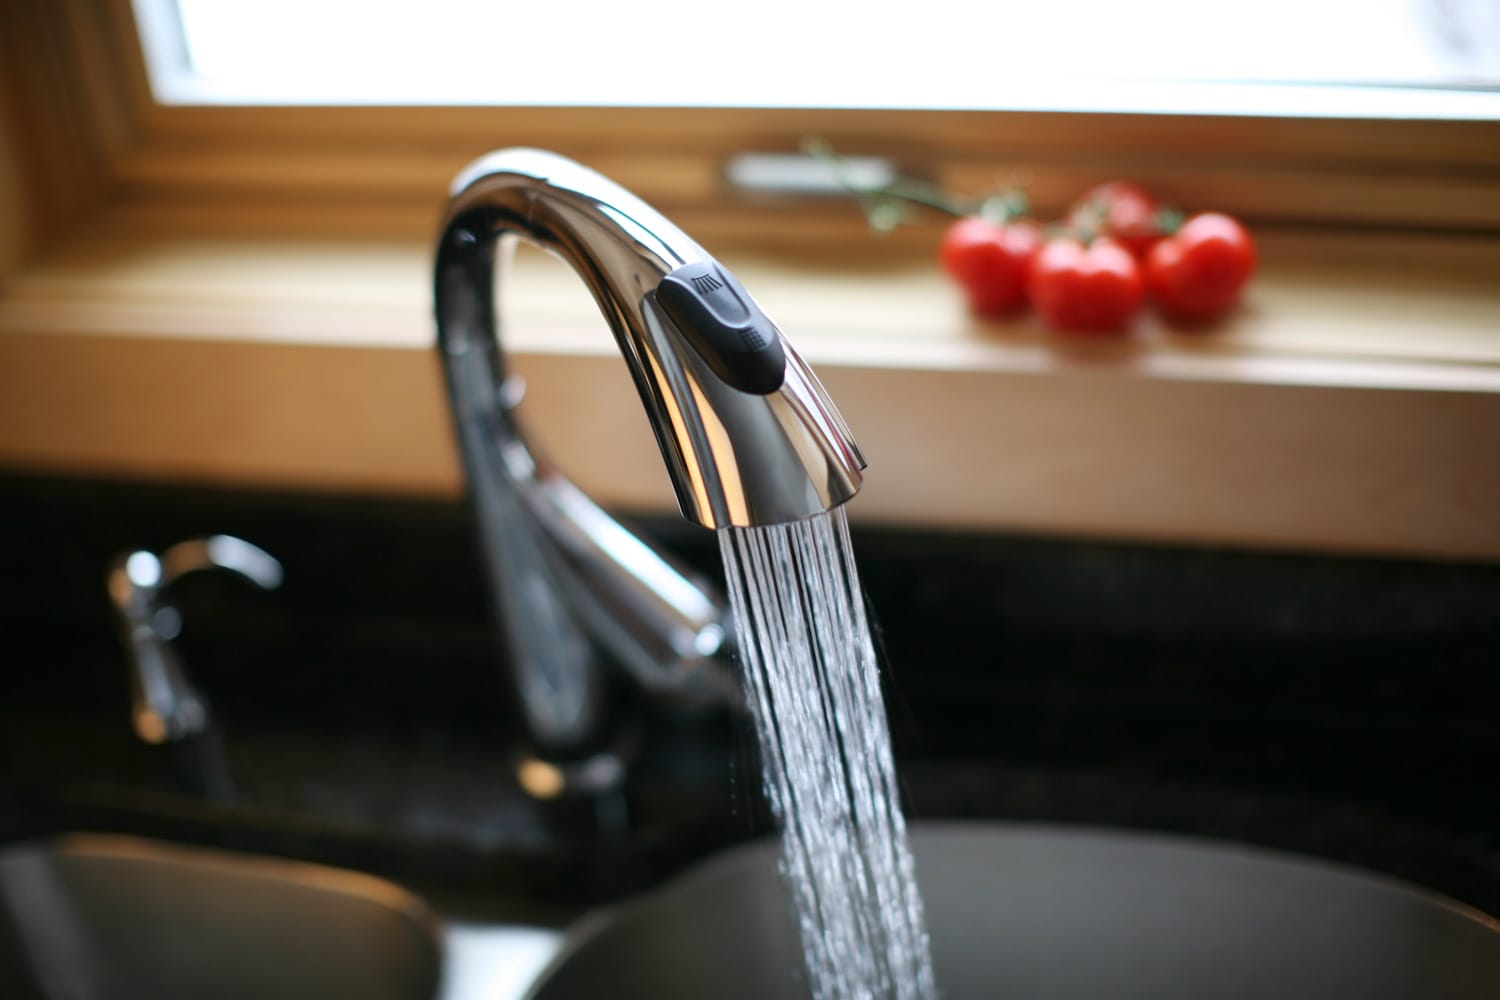 Kitchen faucet spraying fresh, clean cold water.